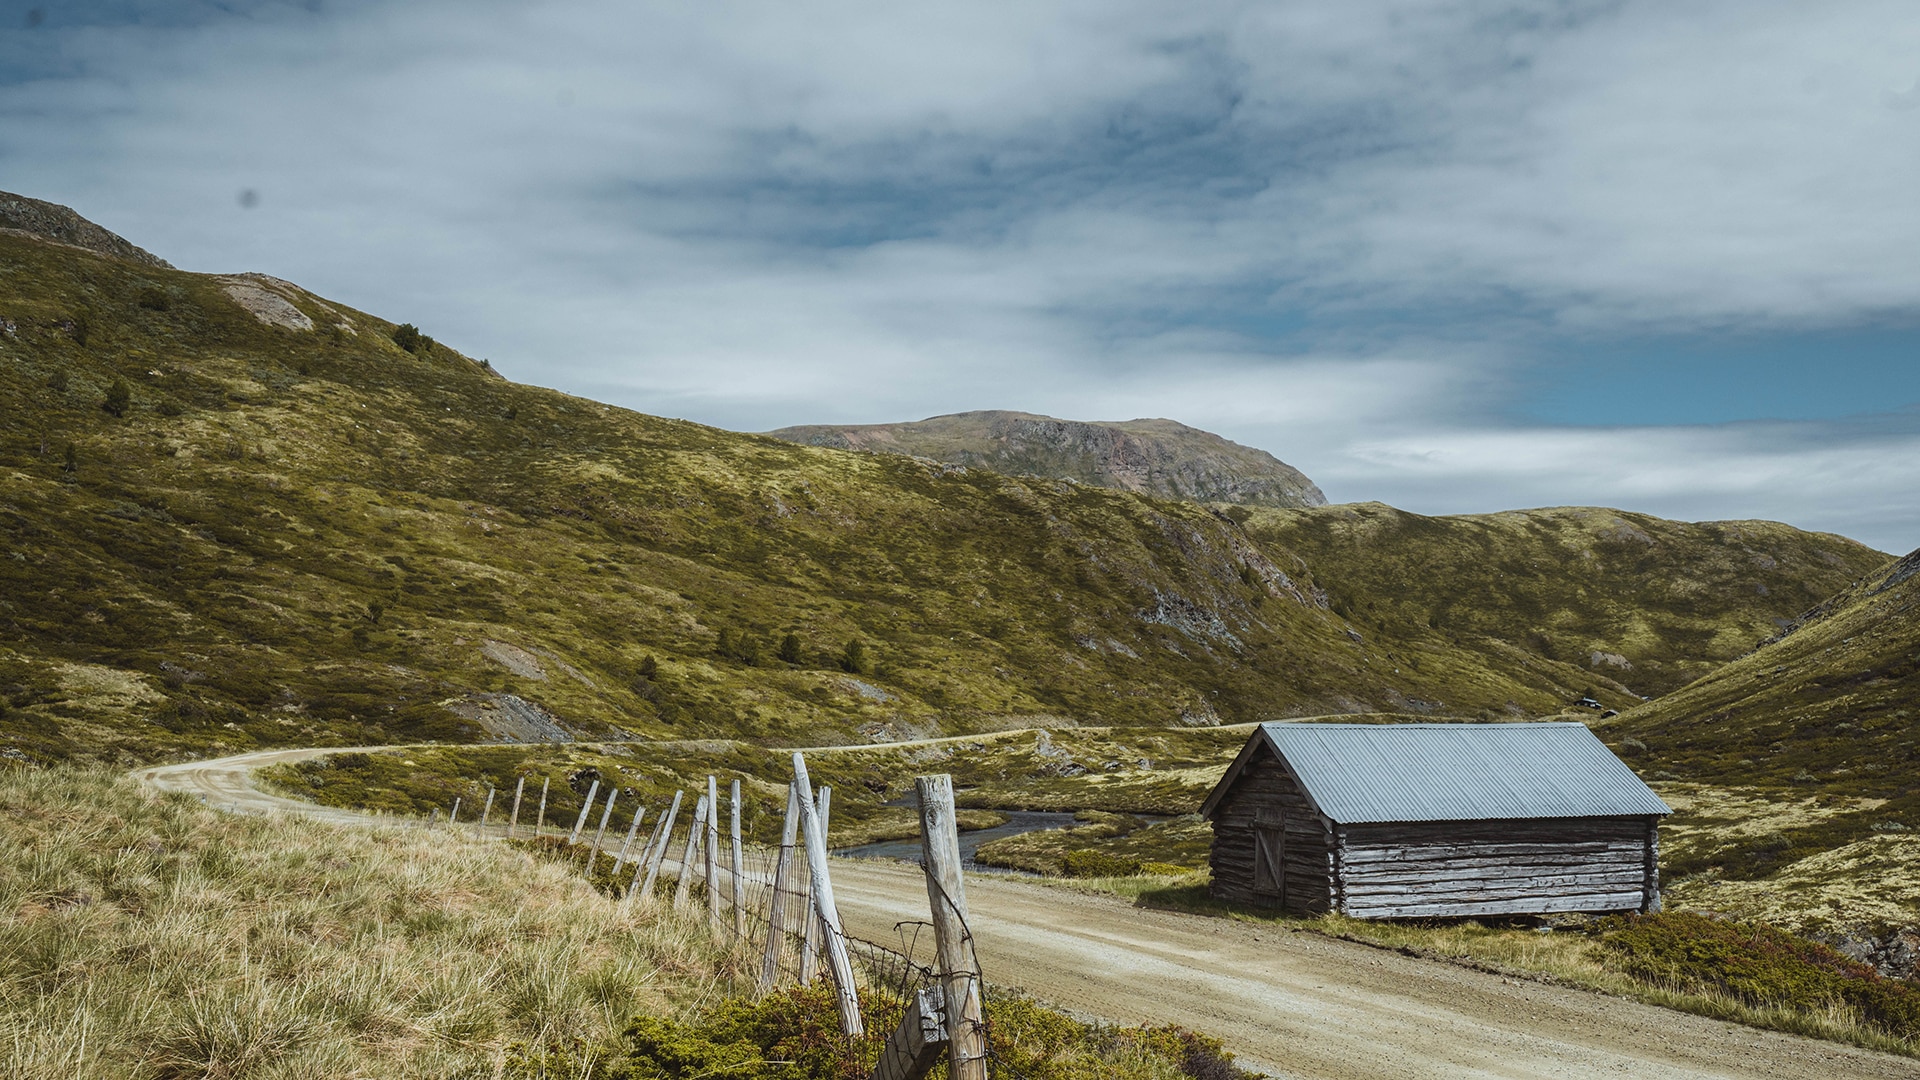 An old remote laft house next to a winding dirt road surrounded by mountains on Dovre.